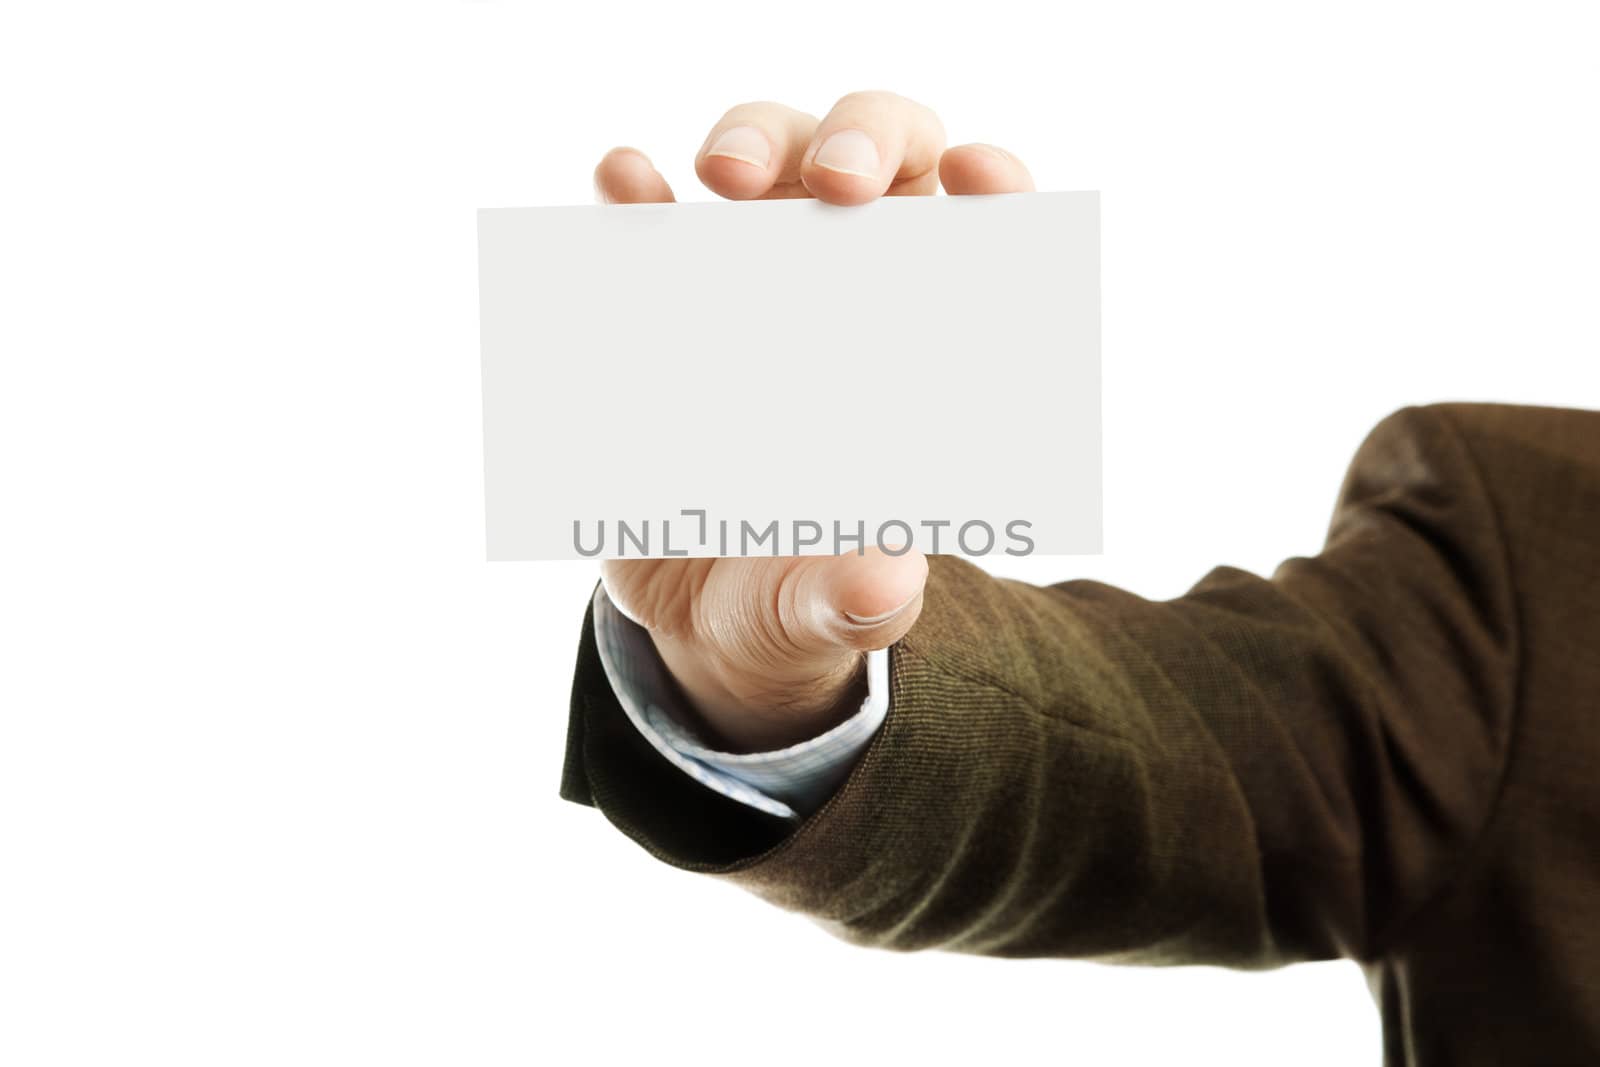 place your text or design on empty space ,isolated on white background focus point on fingers (selective)